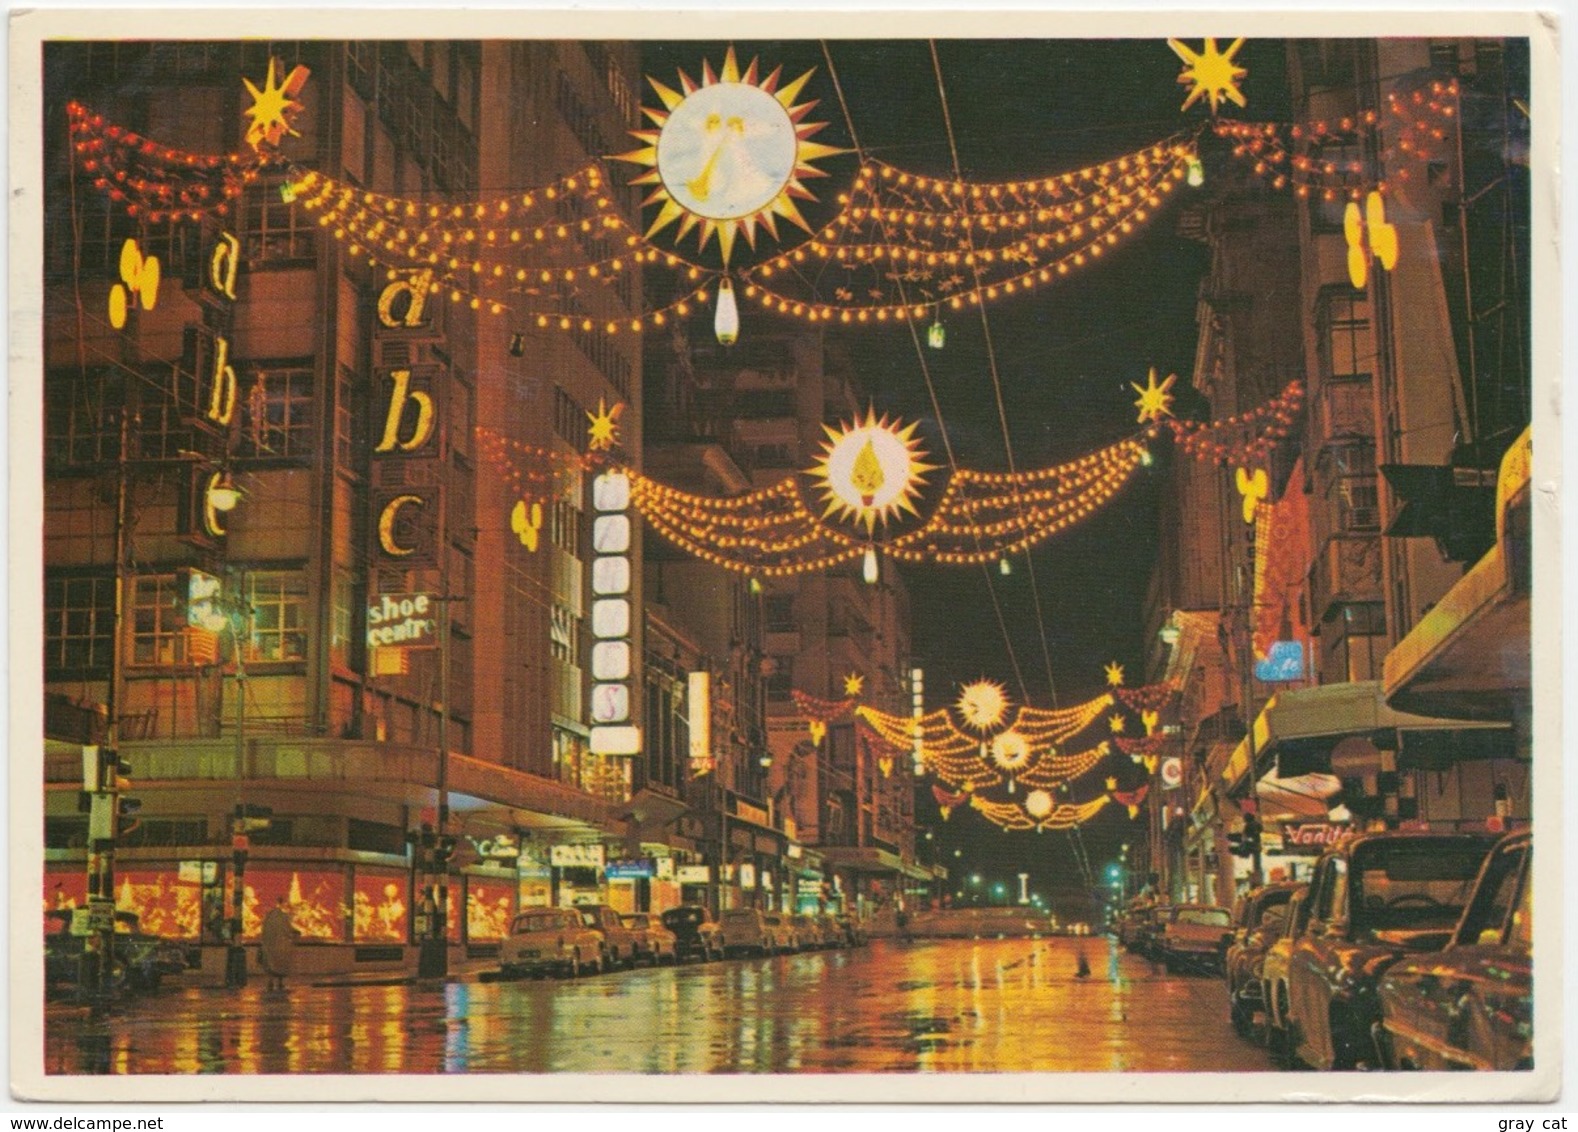 JOHANNESBURG, Dazzling Night Scene Of Golden City In Festive Dress, South Africa, 1967 Used Postcard [22063] - South Africa